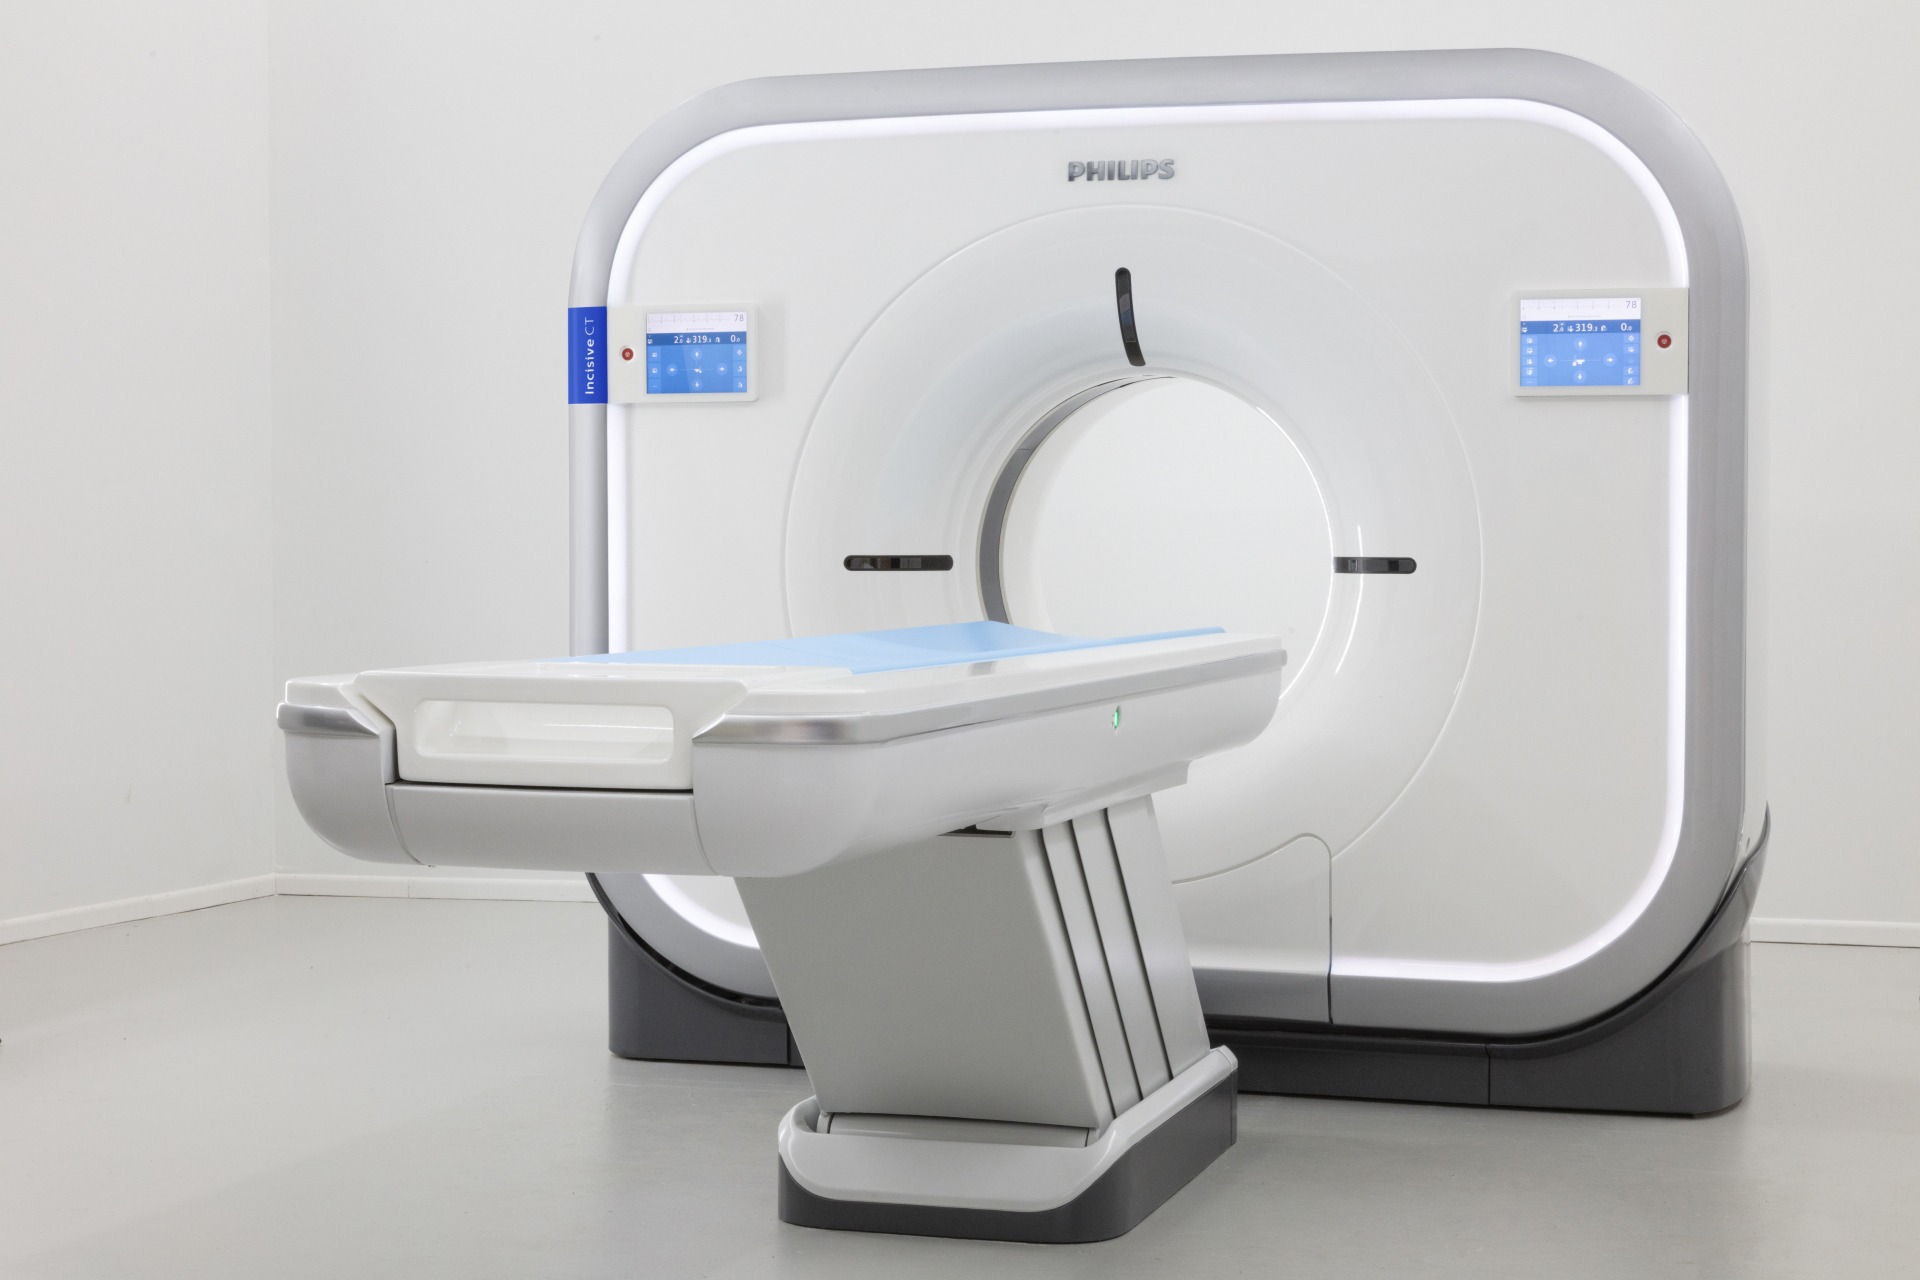 Philips to provide Spanish Viamed hospital group with advanced diagnostic imaging solutions